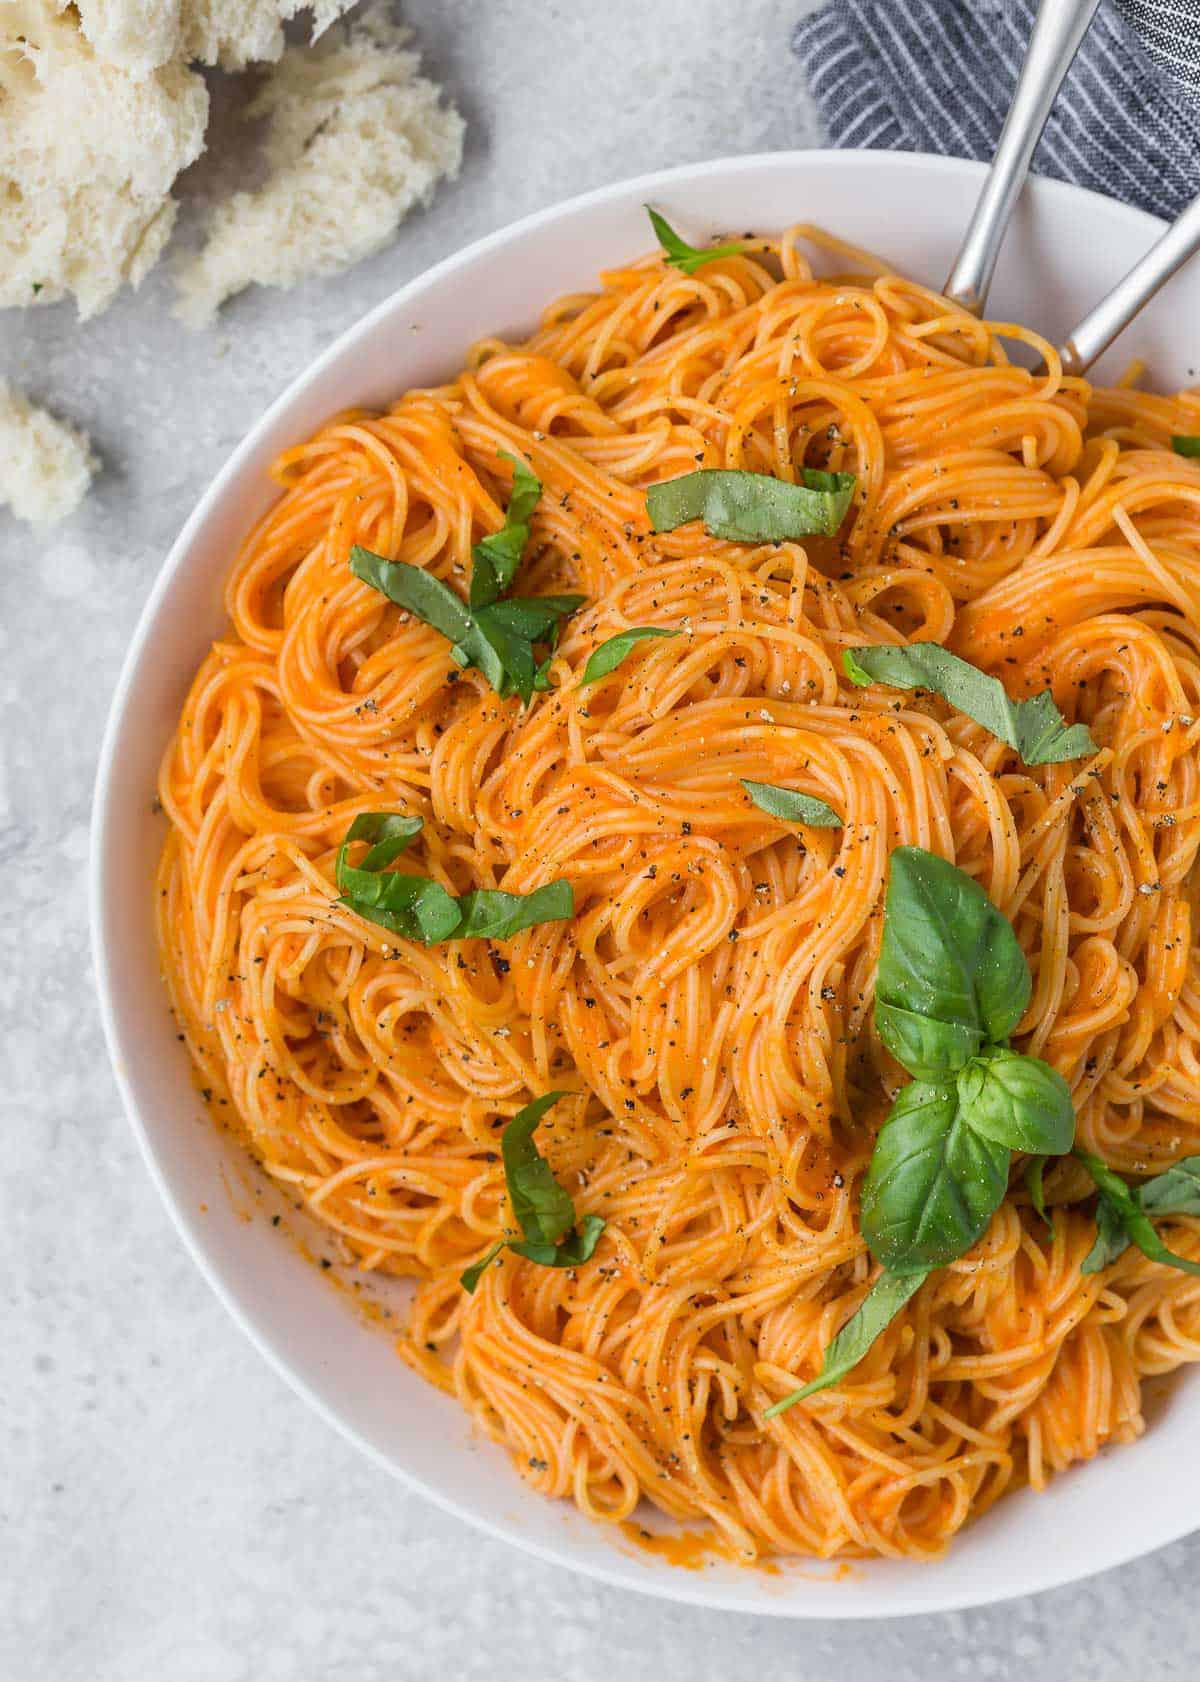 Overhead view of angel hair in a light orange sauce, garnished with fresh basil.